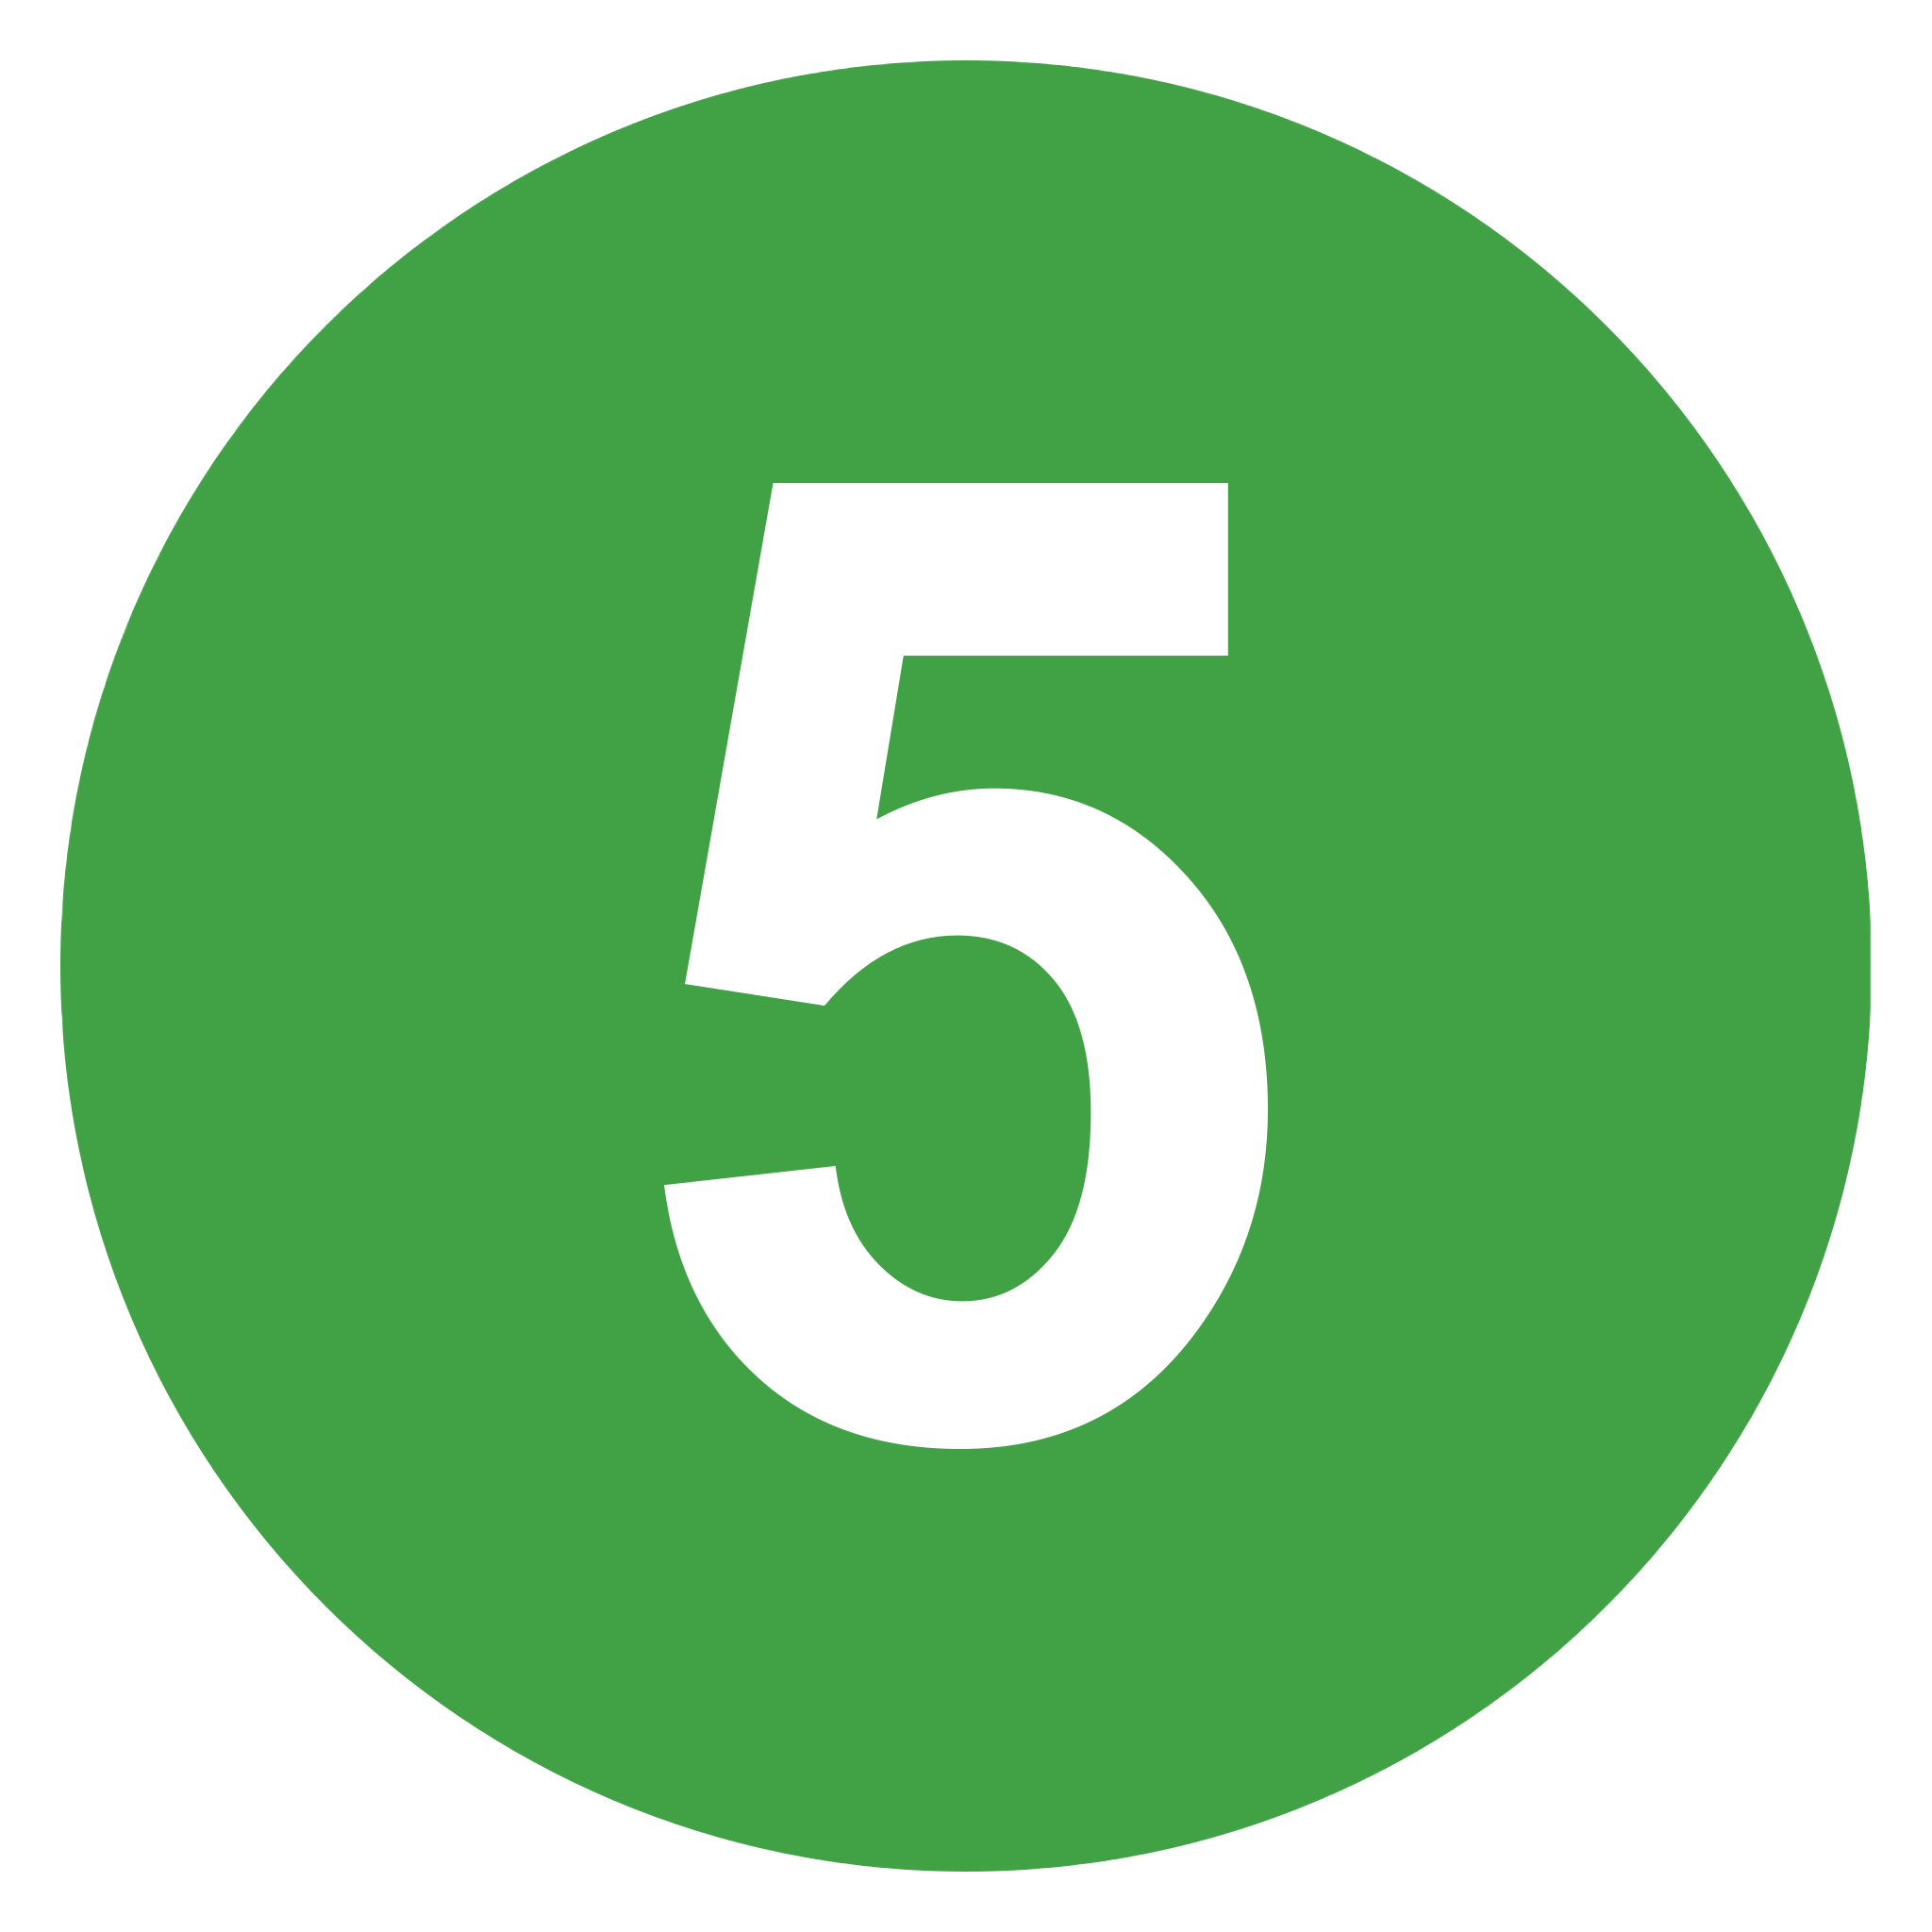 Eo_circle_green_number-5.svg (2)